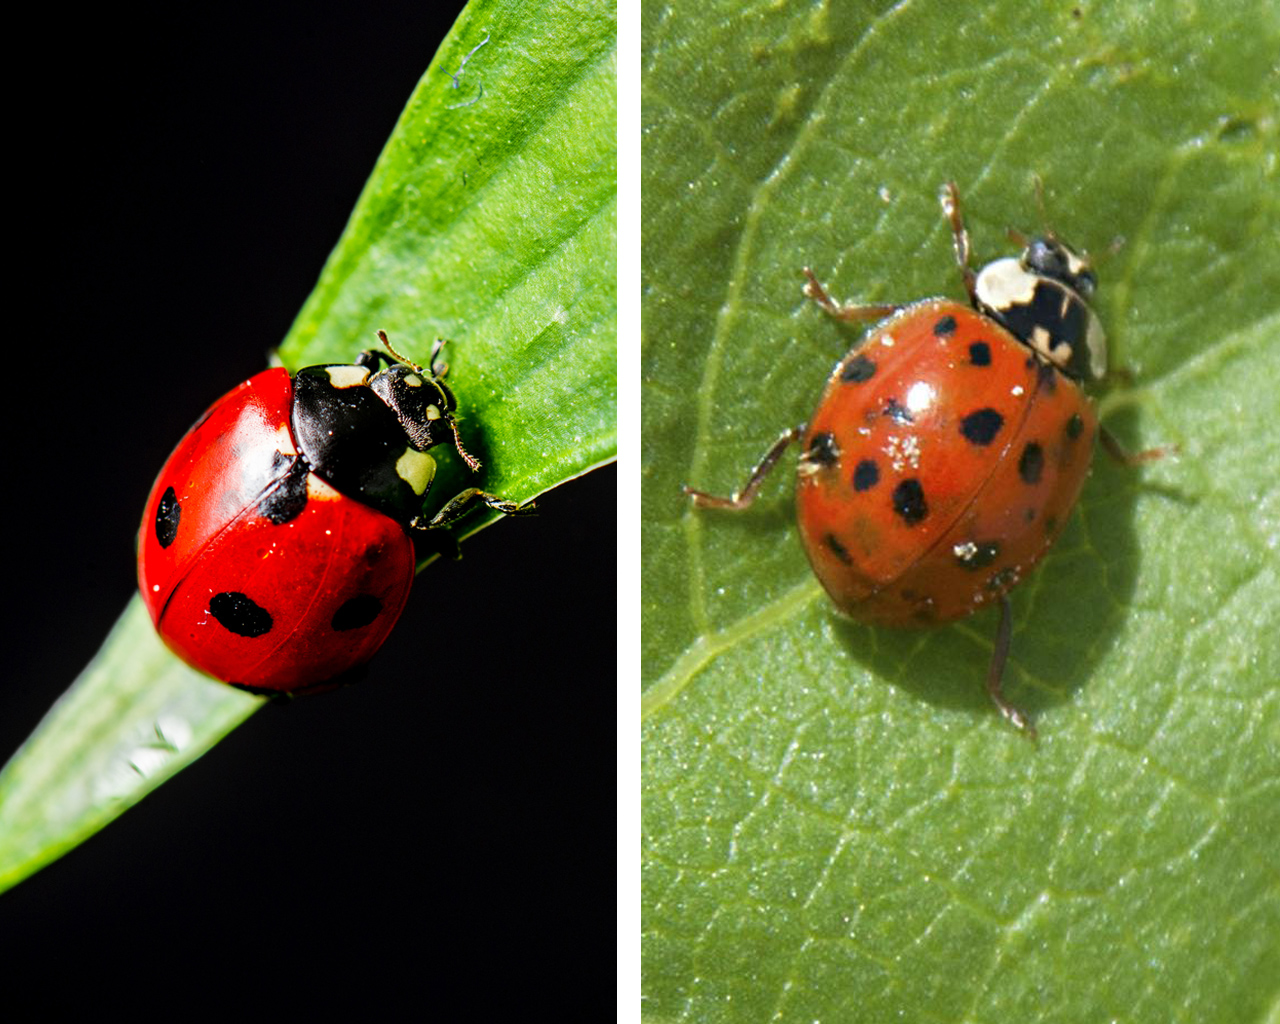 Close-up photos showing a side-by-side comparison of a red ladybug with black spots on a green leaf and an orange Asian lady beetle on a green leaf. (Photos by Canstock and MSU Extension Service)